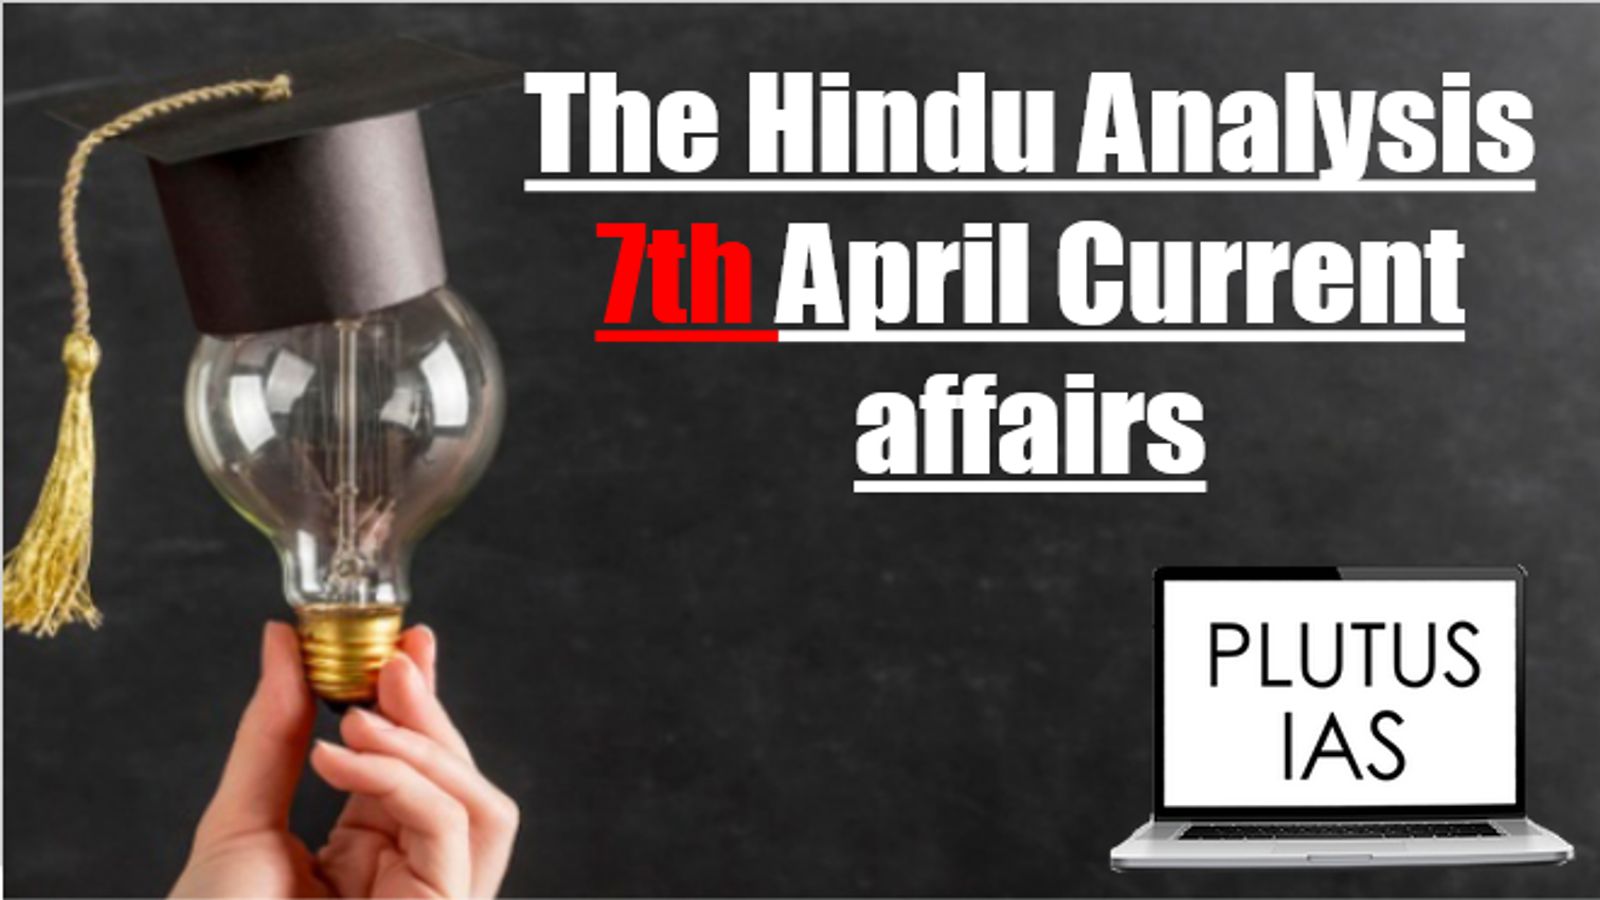 Today Current Affairs 7th April